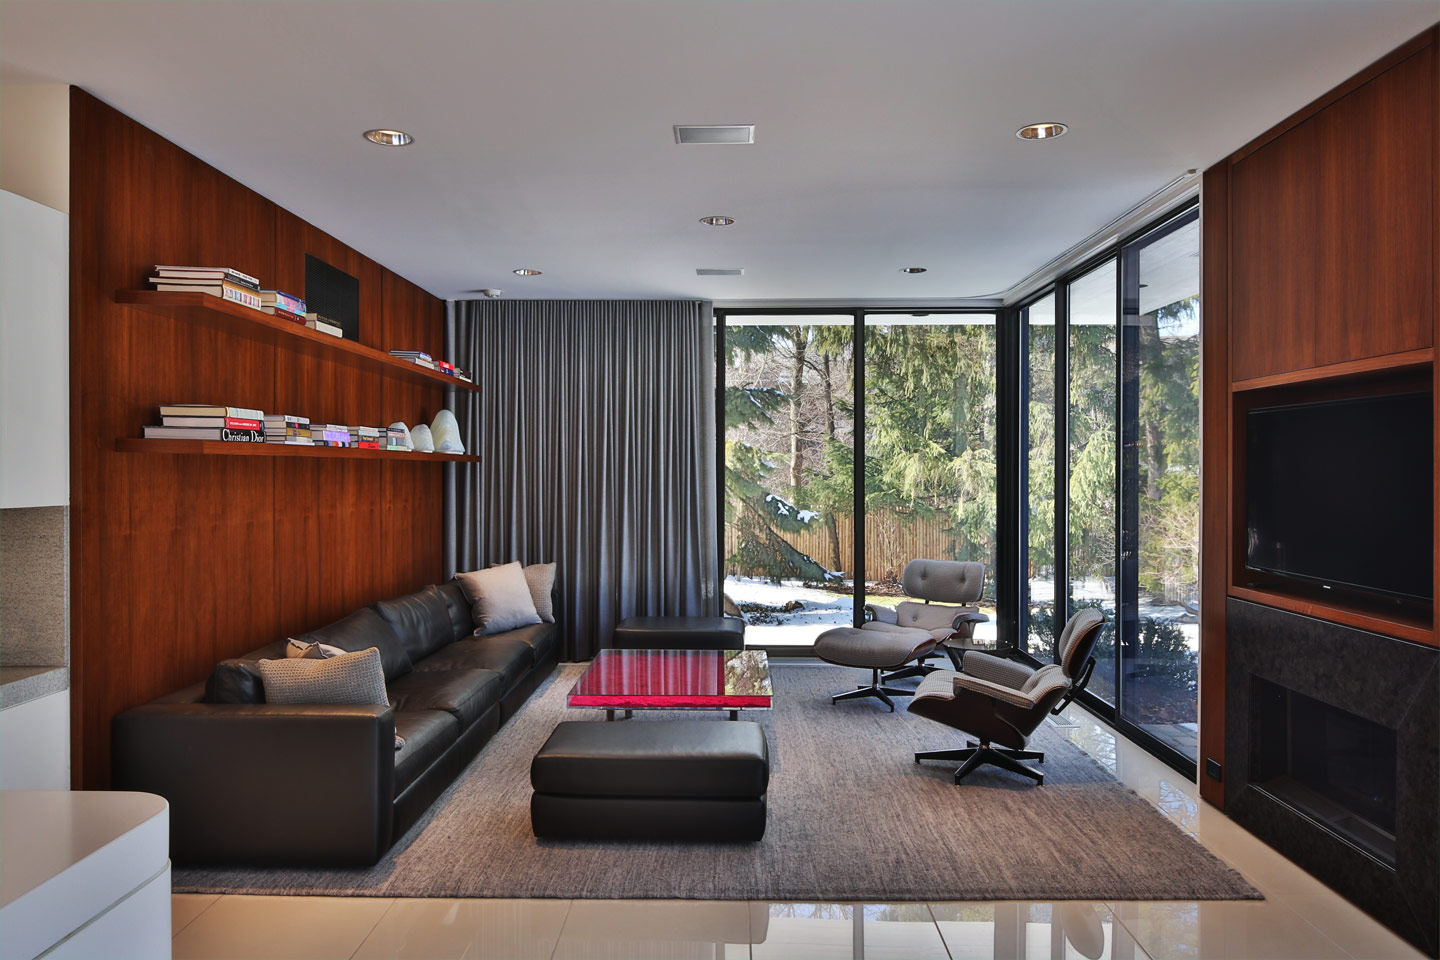 a beautiful ultra-modern living room surrounded by glass, built by berliant builders